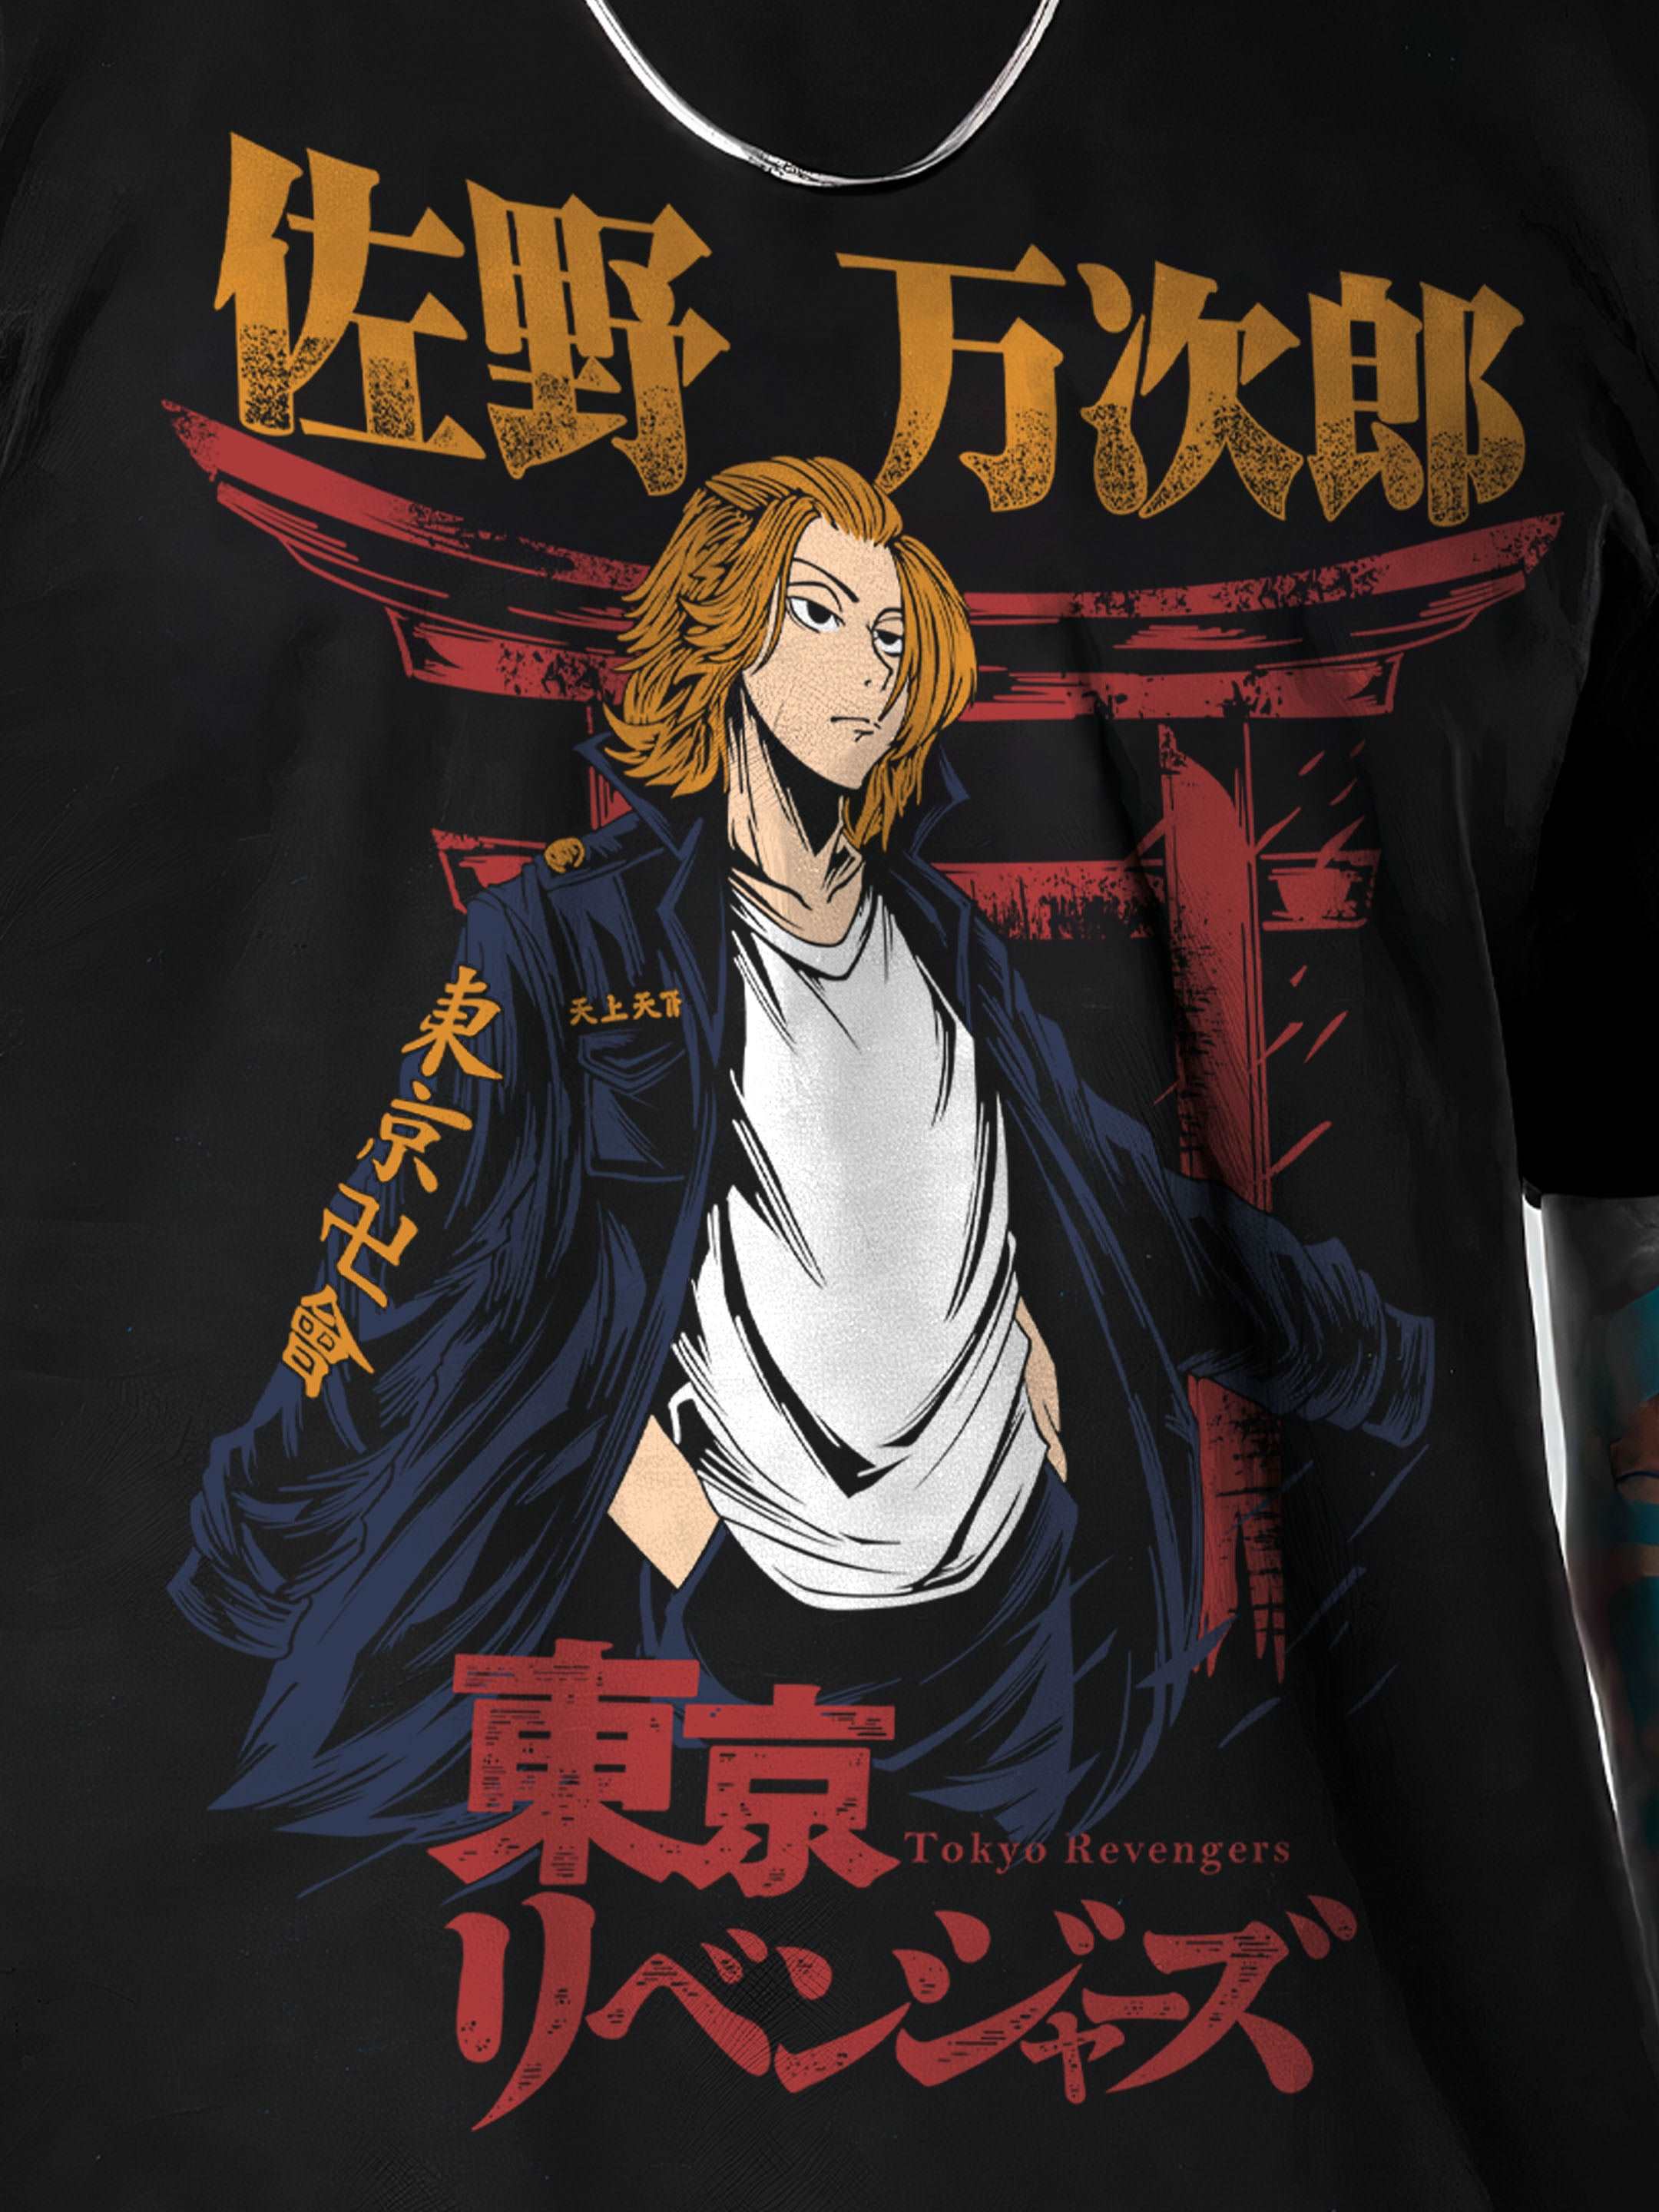 Buy Sano Manjiro Mikey Tokyo Revengers Anime T-Shirt Mens Short Sleeve  Harajuku Casual T-Shirts Male Crewneck Fashion Tee Top For Man at  affordable prices — free shipping, real reviews with photos —